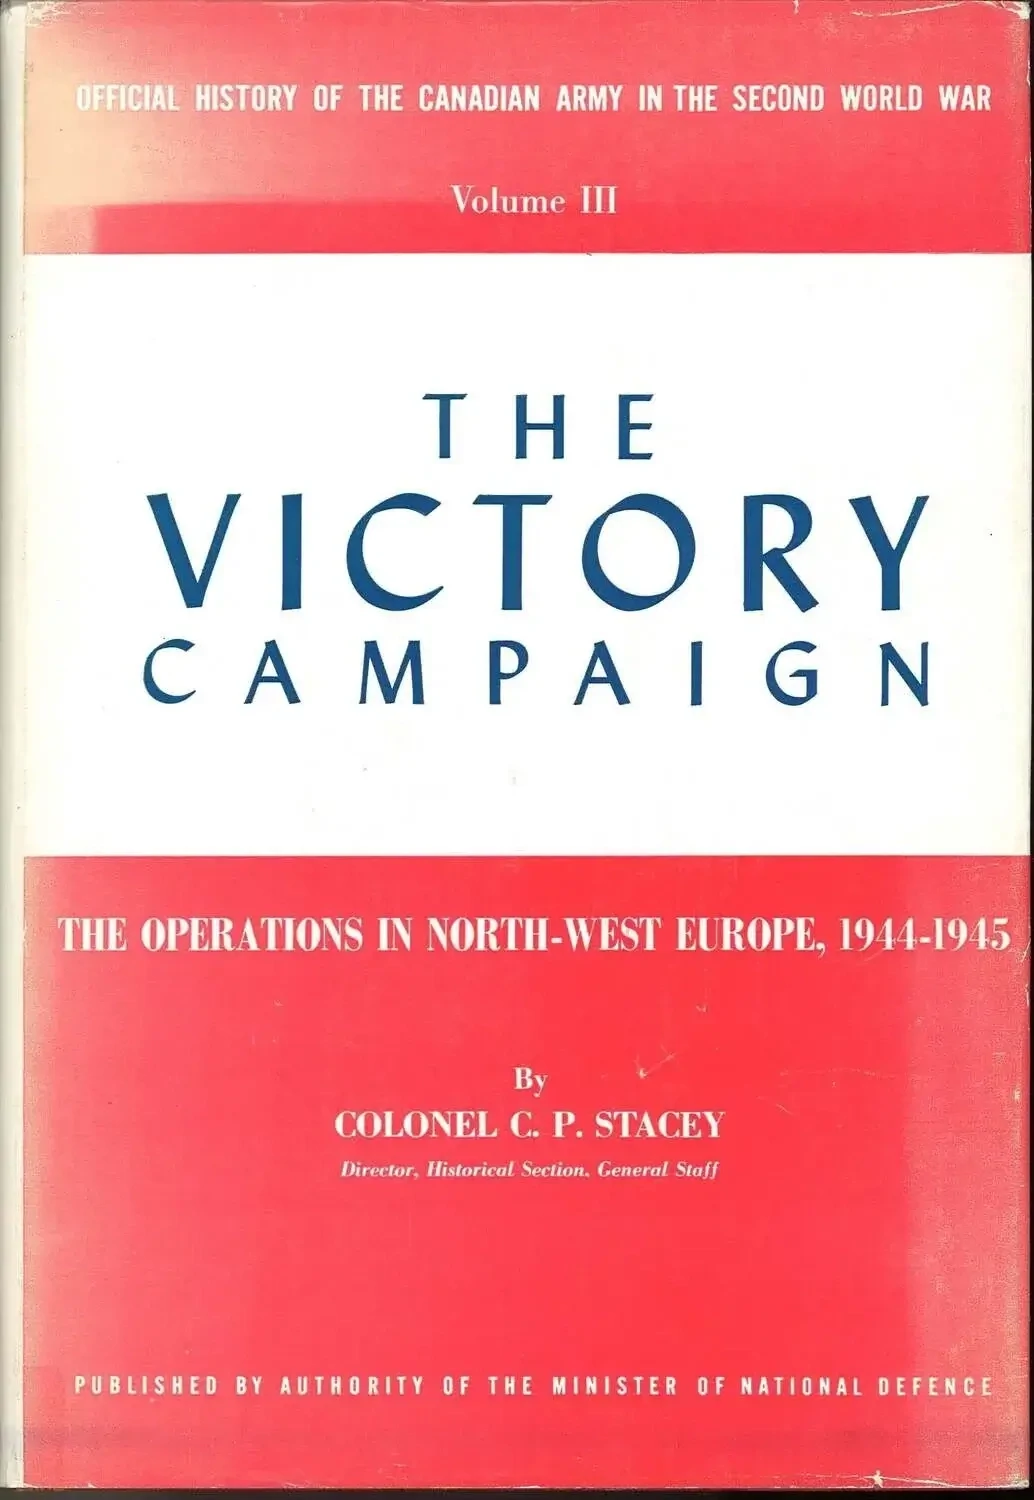 The Victory Campaign, Volume III by Colonel C. P. Stacey